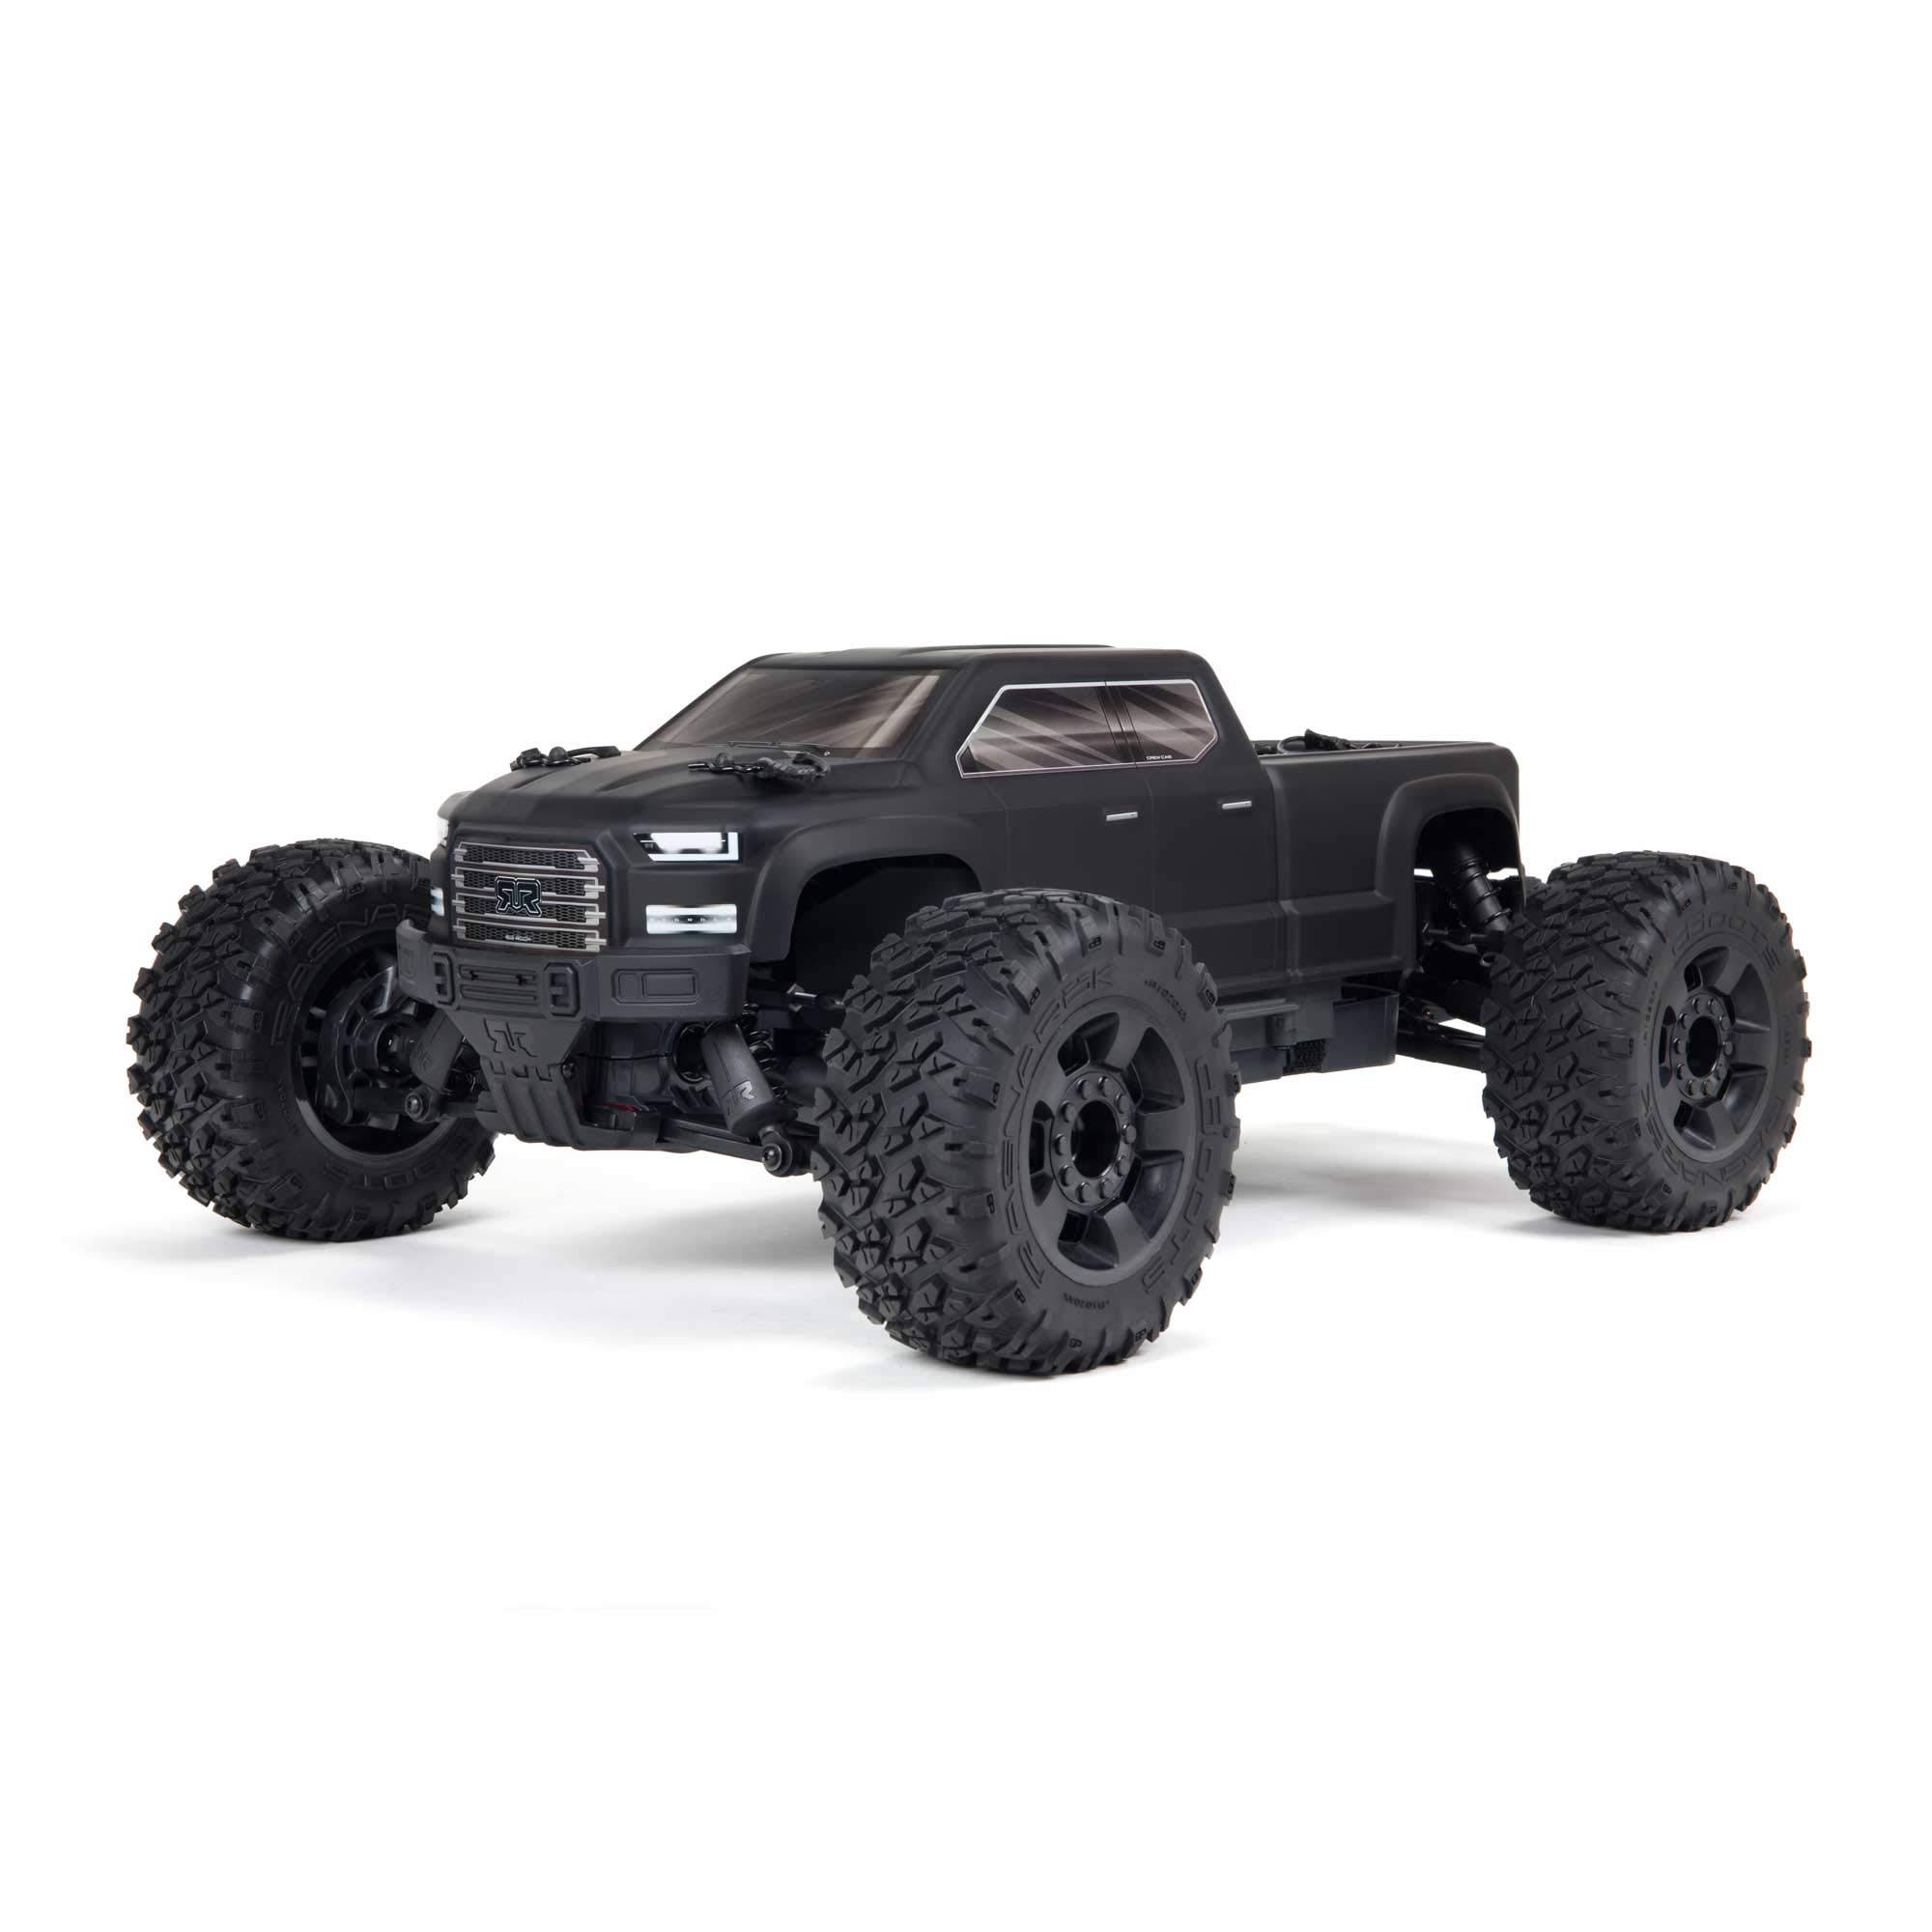 ARRMA 1/10 Big Rock 4X4 V3 3S BLX Brushless Monster RC Truck RTR (Transmitter and Receiver Included, Batteries and Charger Required), Black,